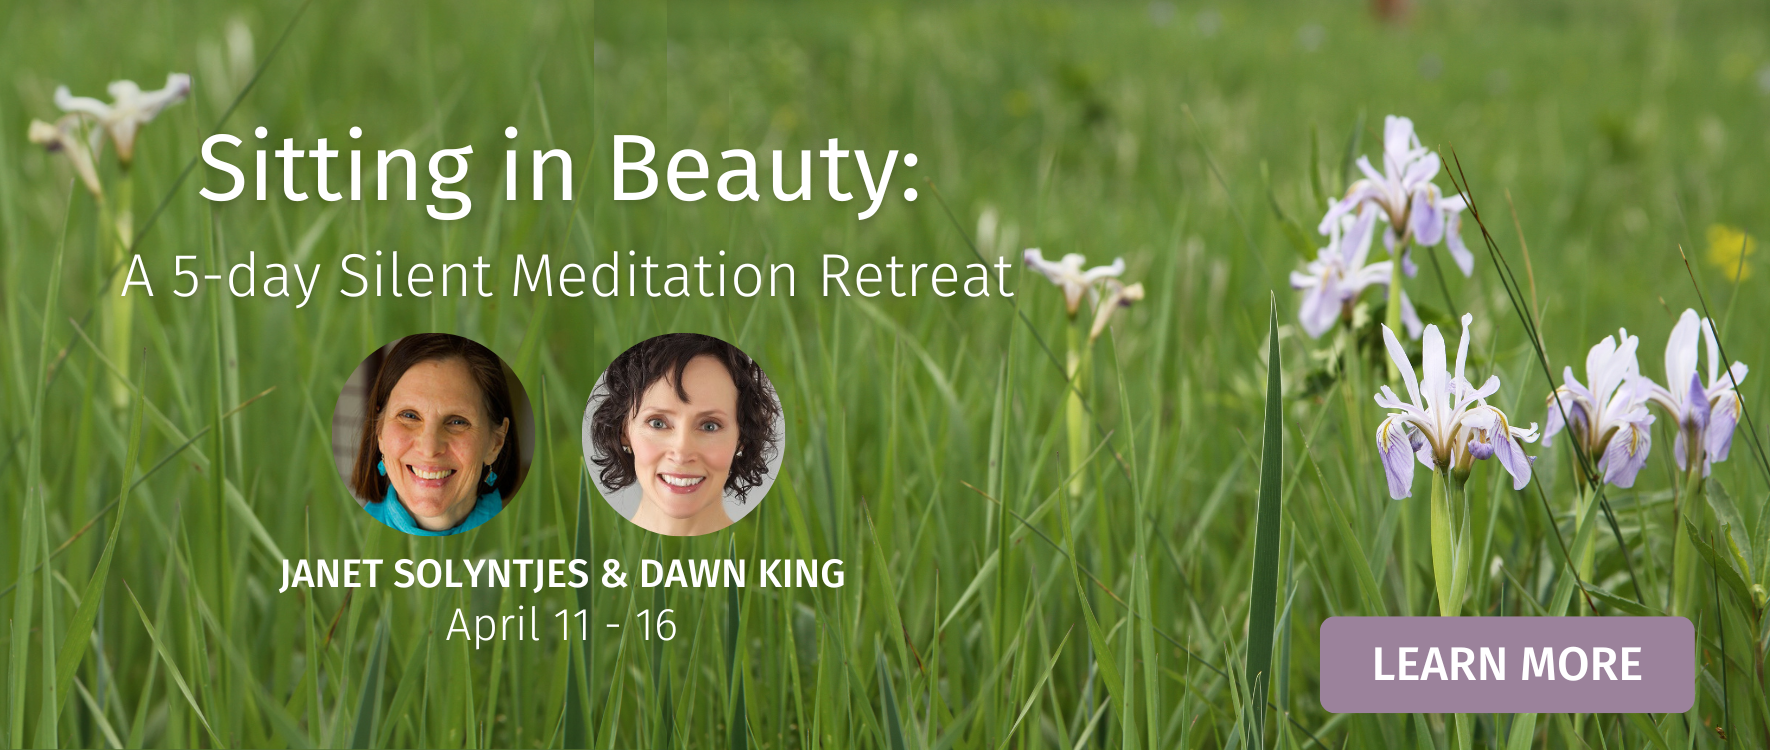 Sitting in Beauty: A 5-day Silent Meditation Retreat April 11-16, 2023